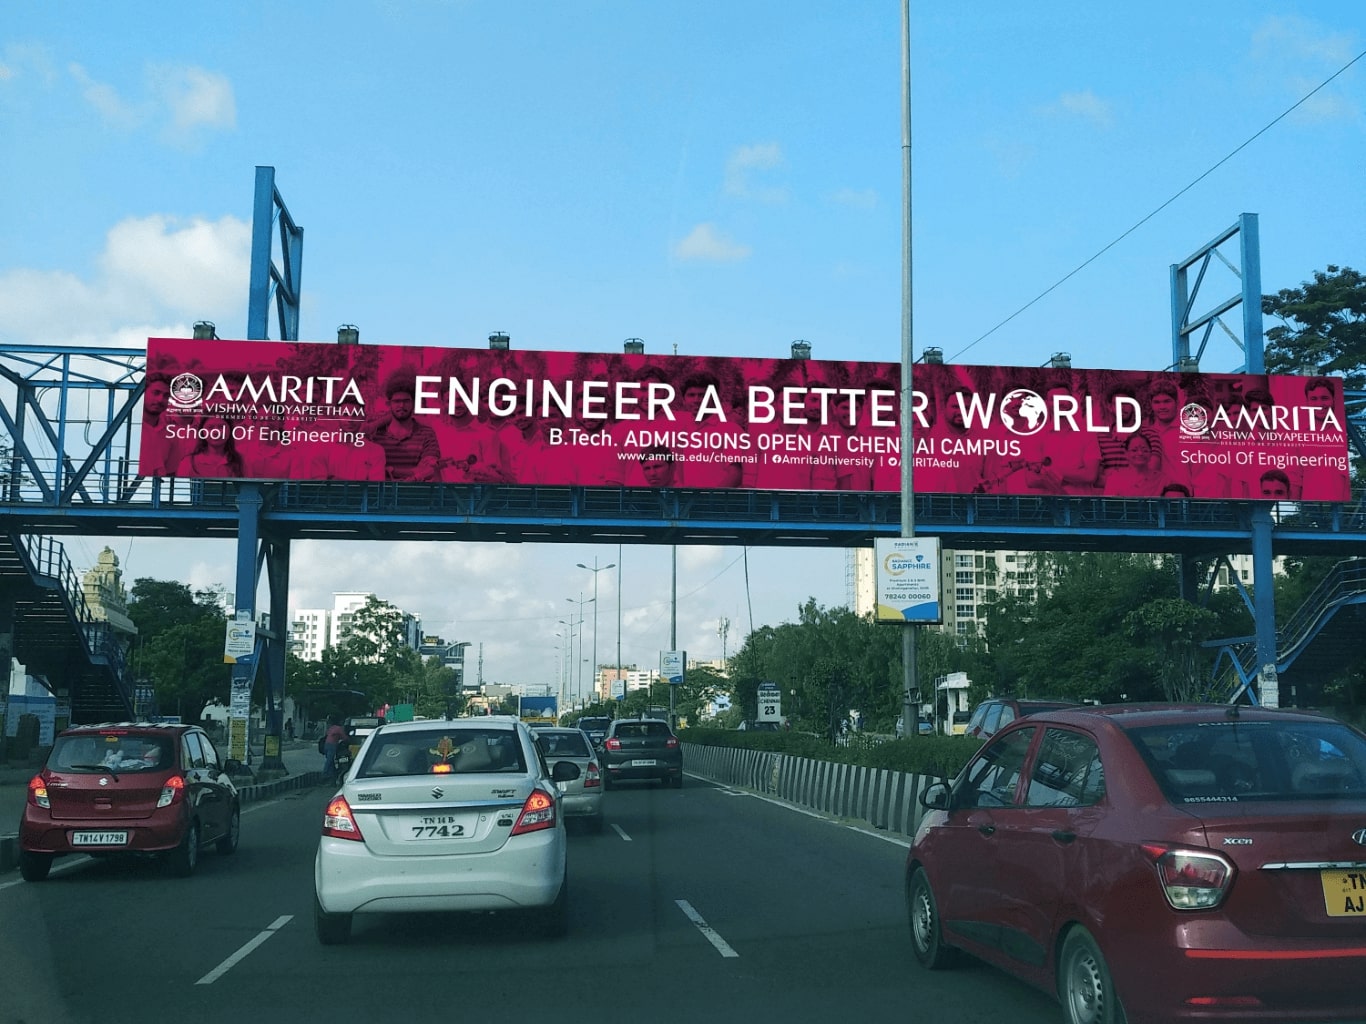 Hoarding designed by Design Foundry for Amrita's Engineer A Better World campaign